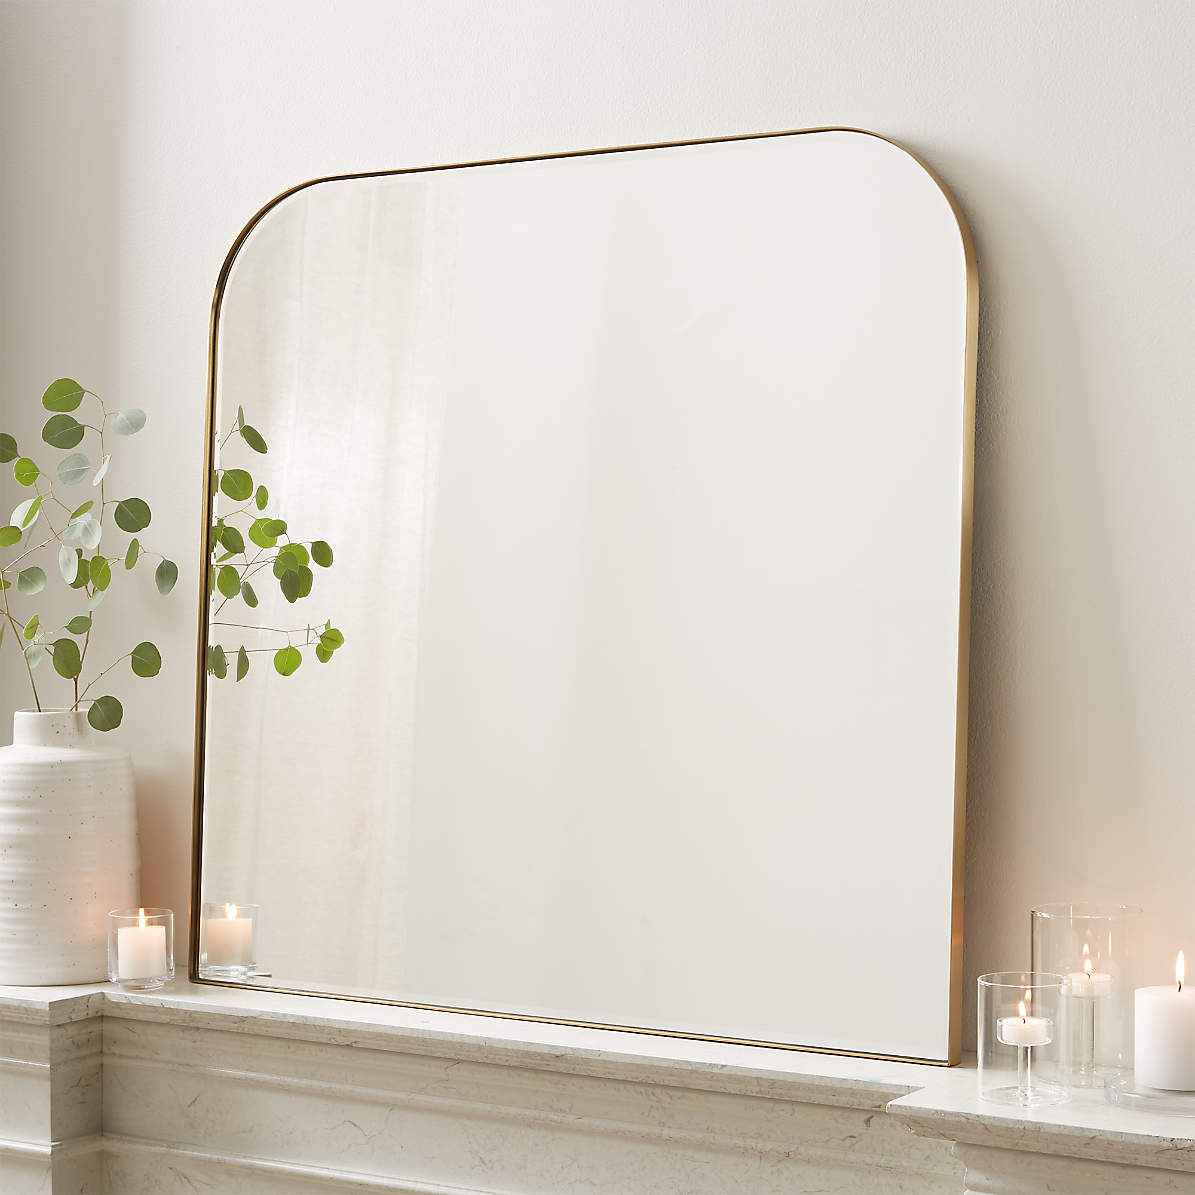 Edge Brass Minimalist Mirror Reviews, How To Hang An Arched Mirror